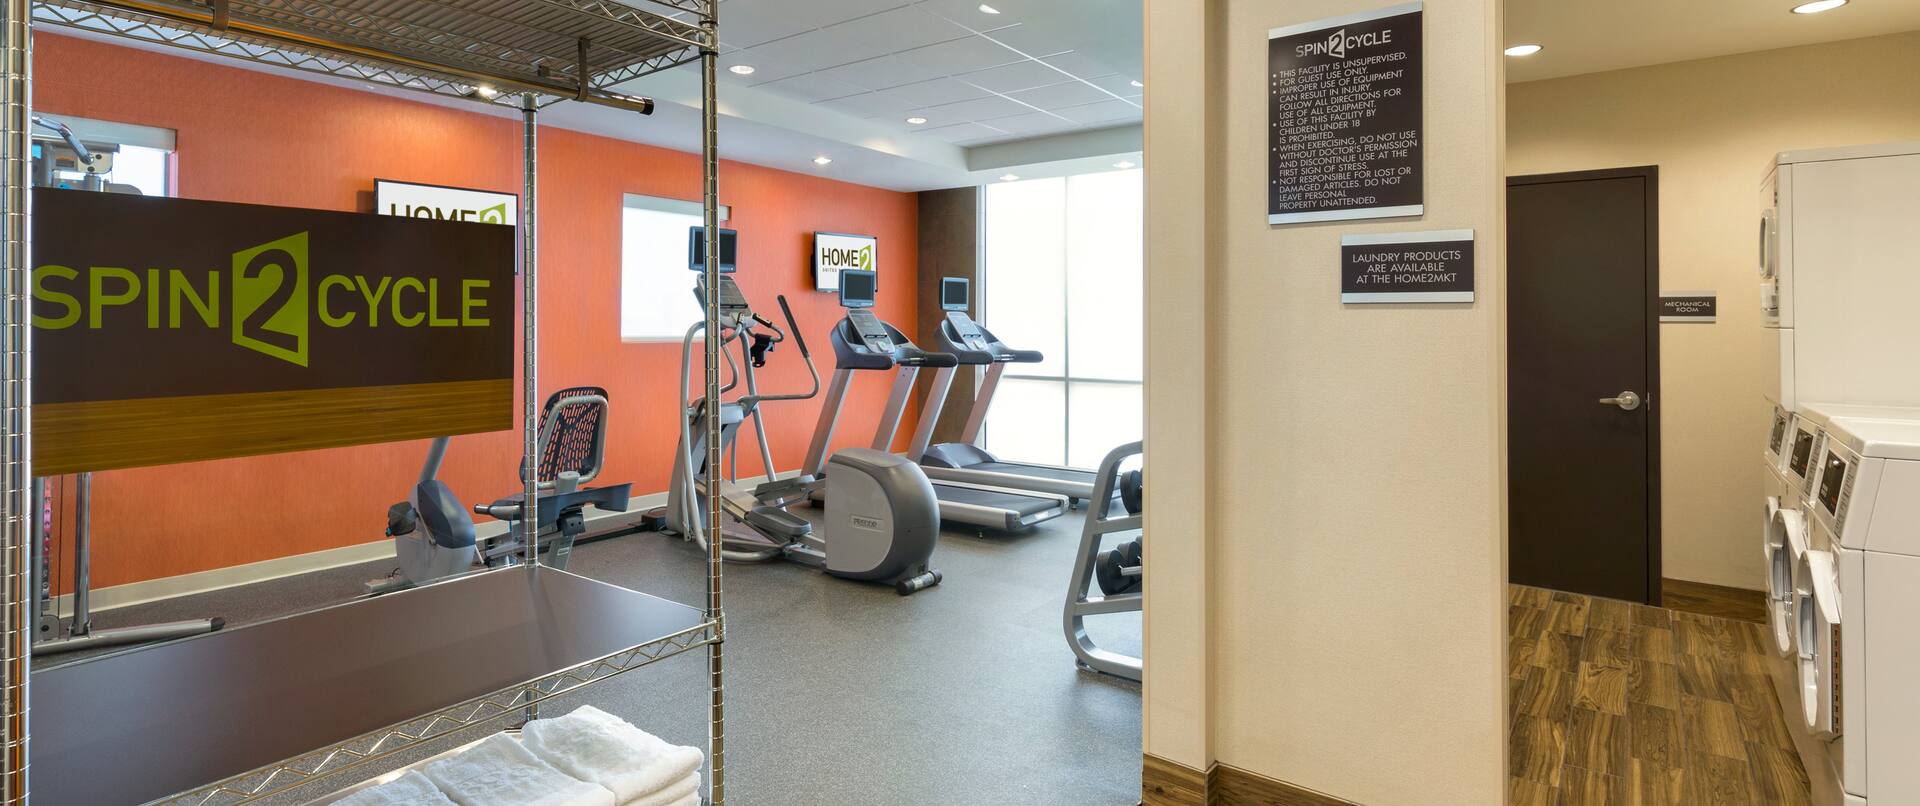 Spin2 Cycle Fitness Center With Cardio Equipment by Window, Towel Rack, and Opening to View of Coin Operated Washing and Drying Machines in Laundry Area